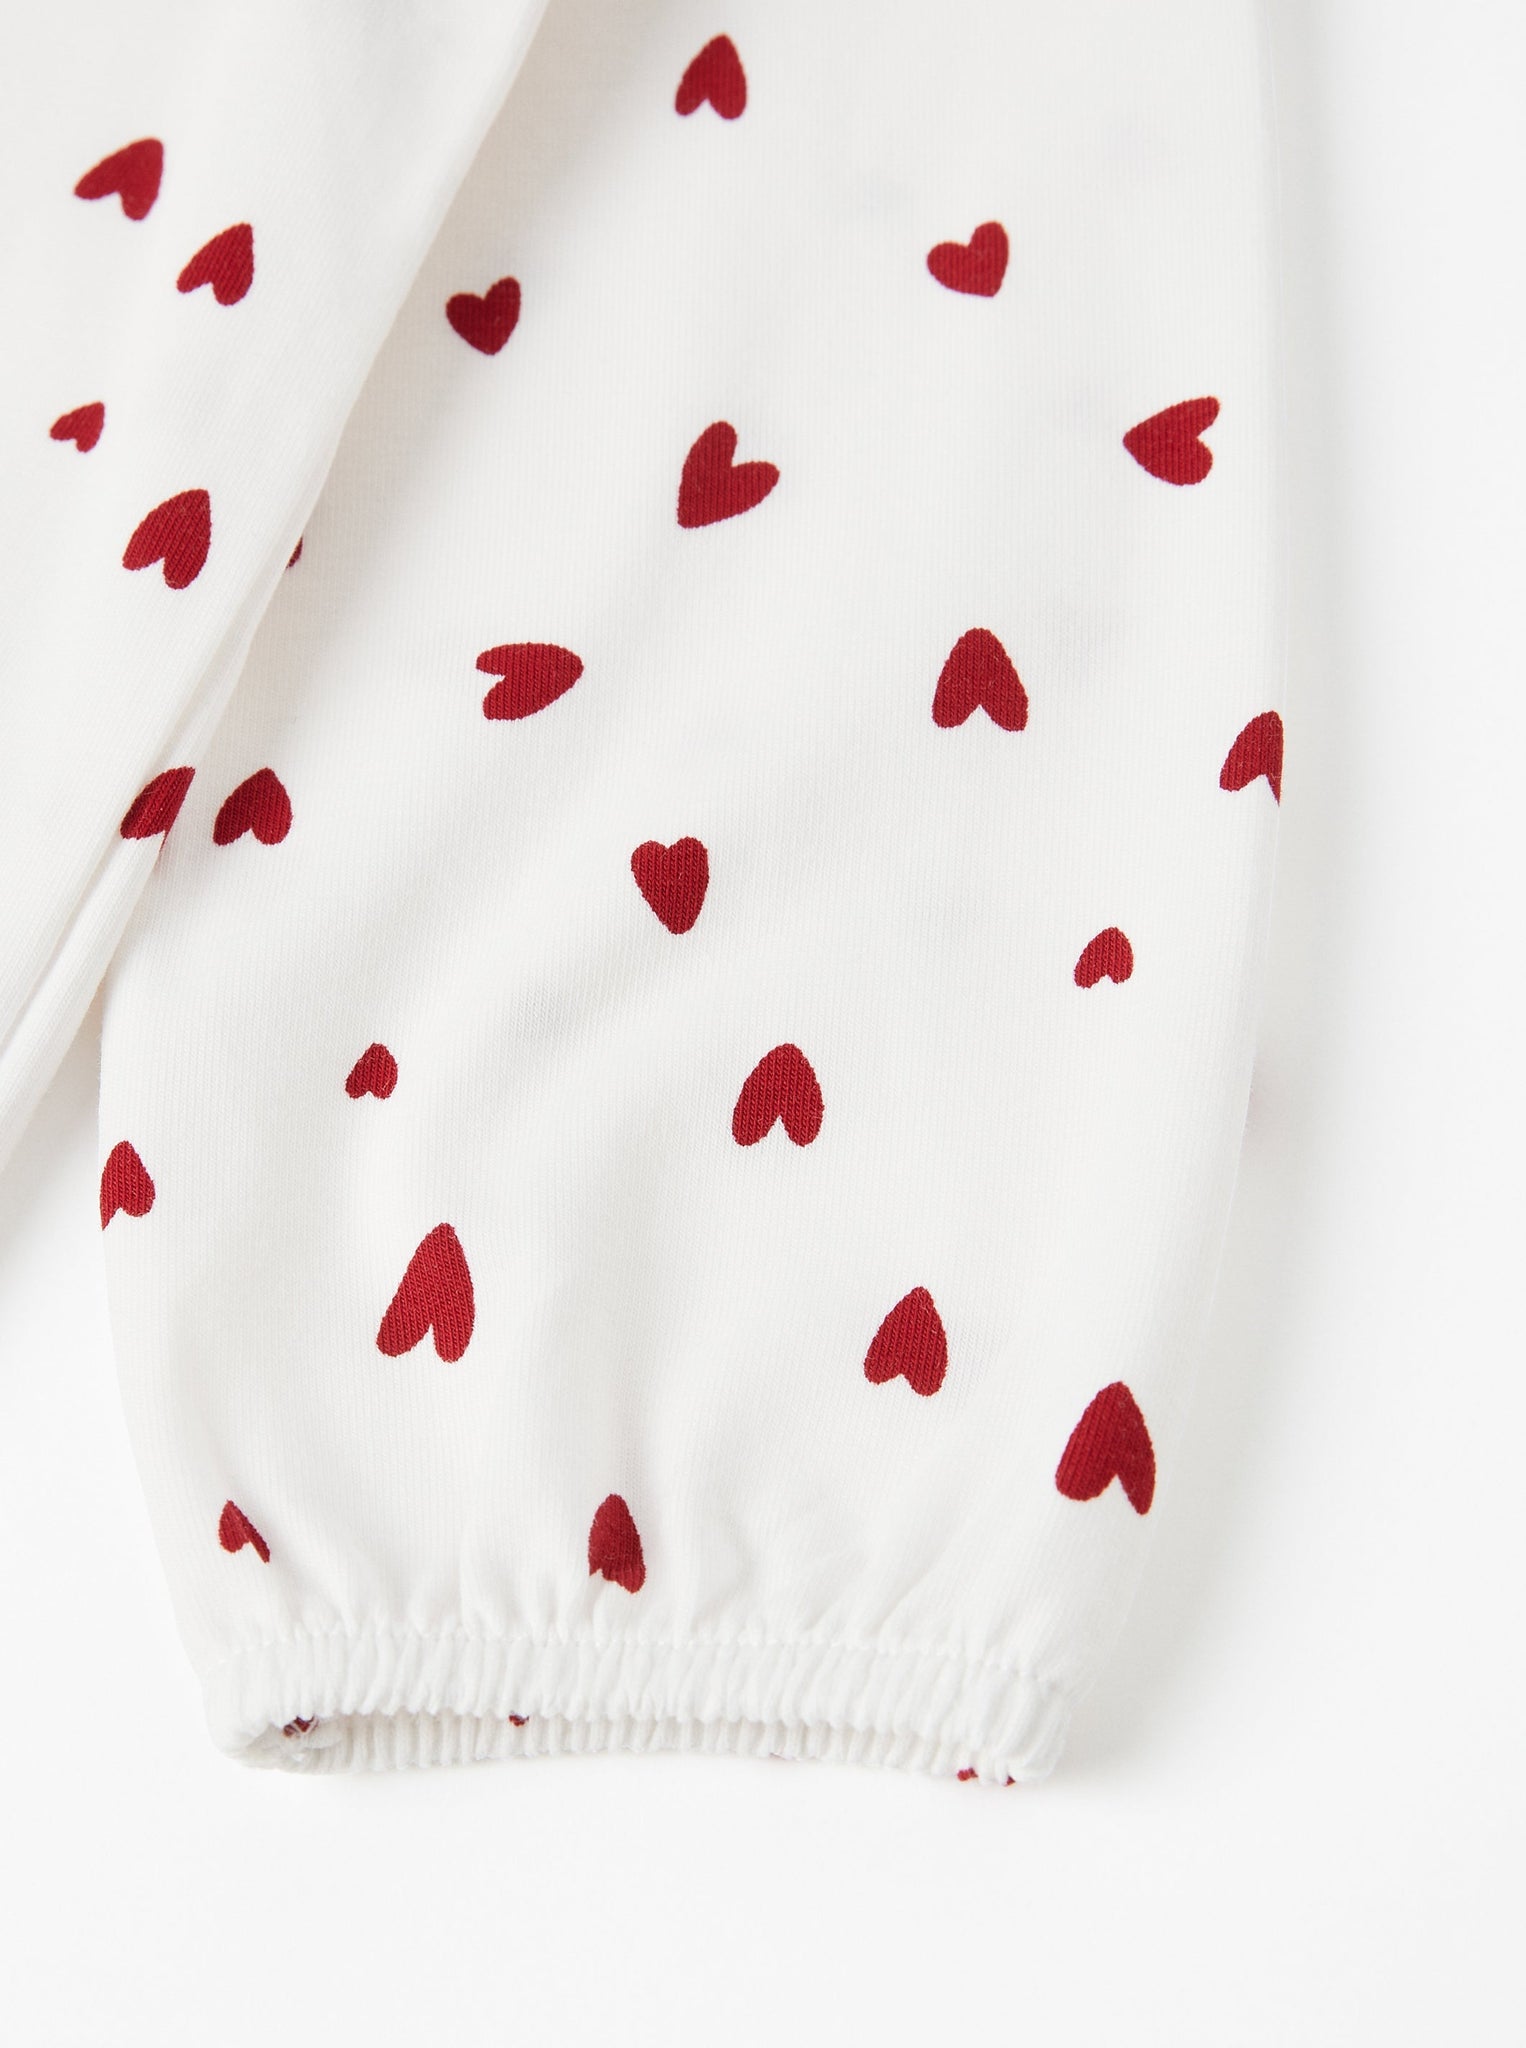 Heart Print White Babygrow from the Polarn O. Pyret baby collection. Clothes made using sustainably sourced materials.